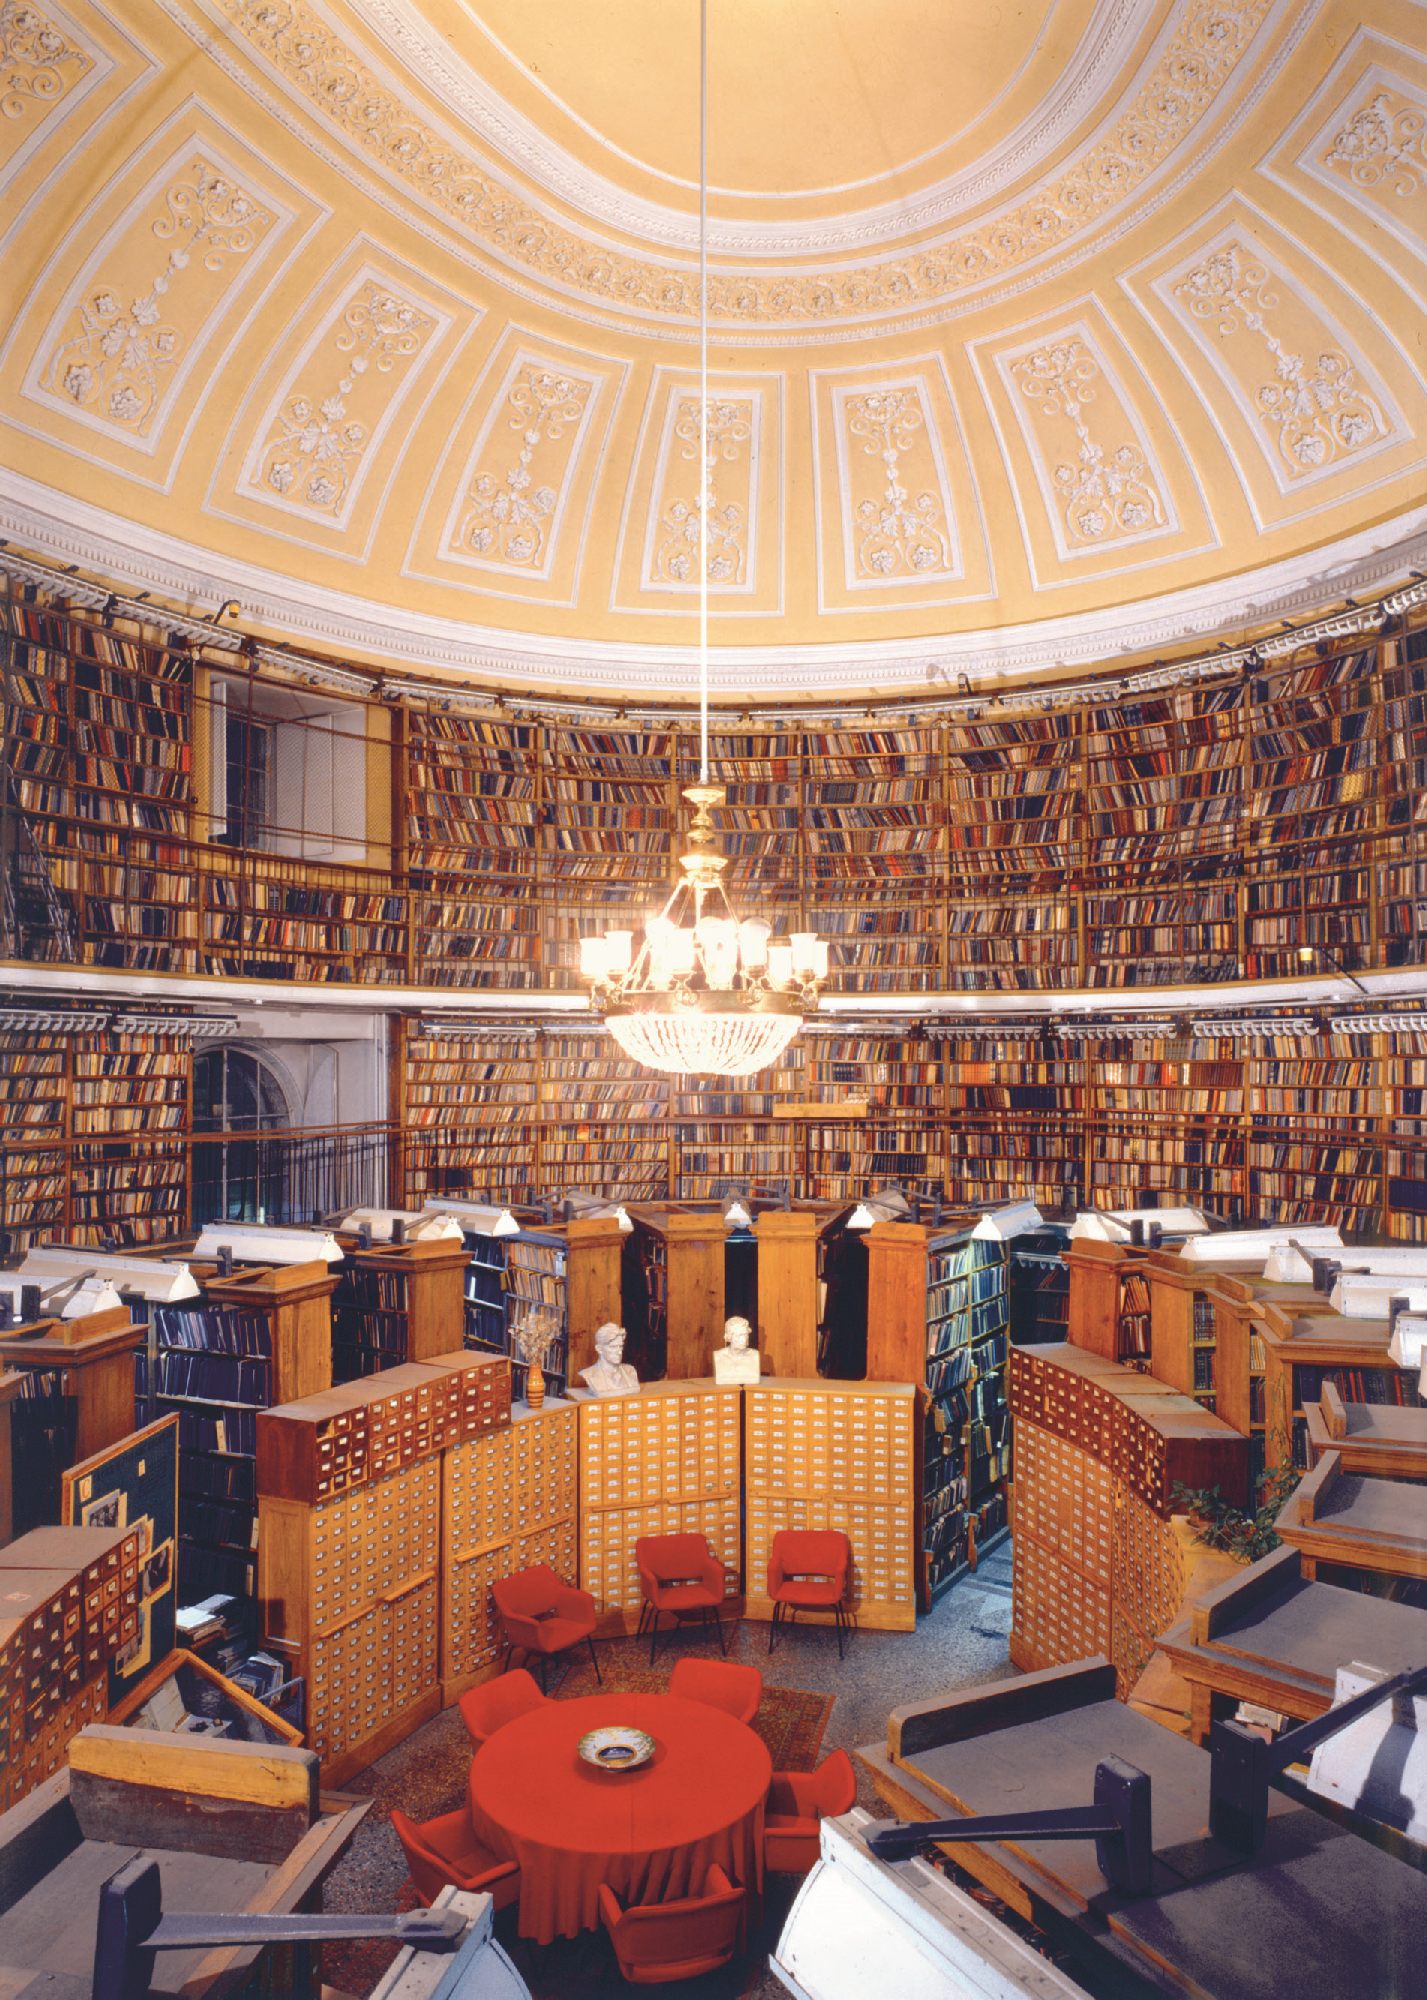 Russian Books Oval Room.1980s